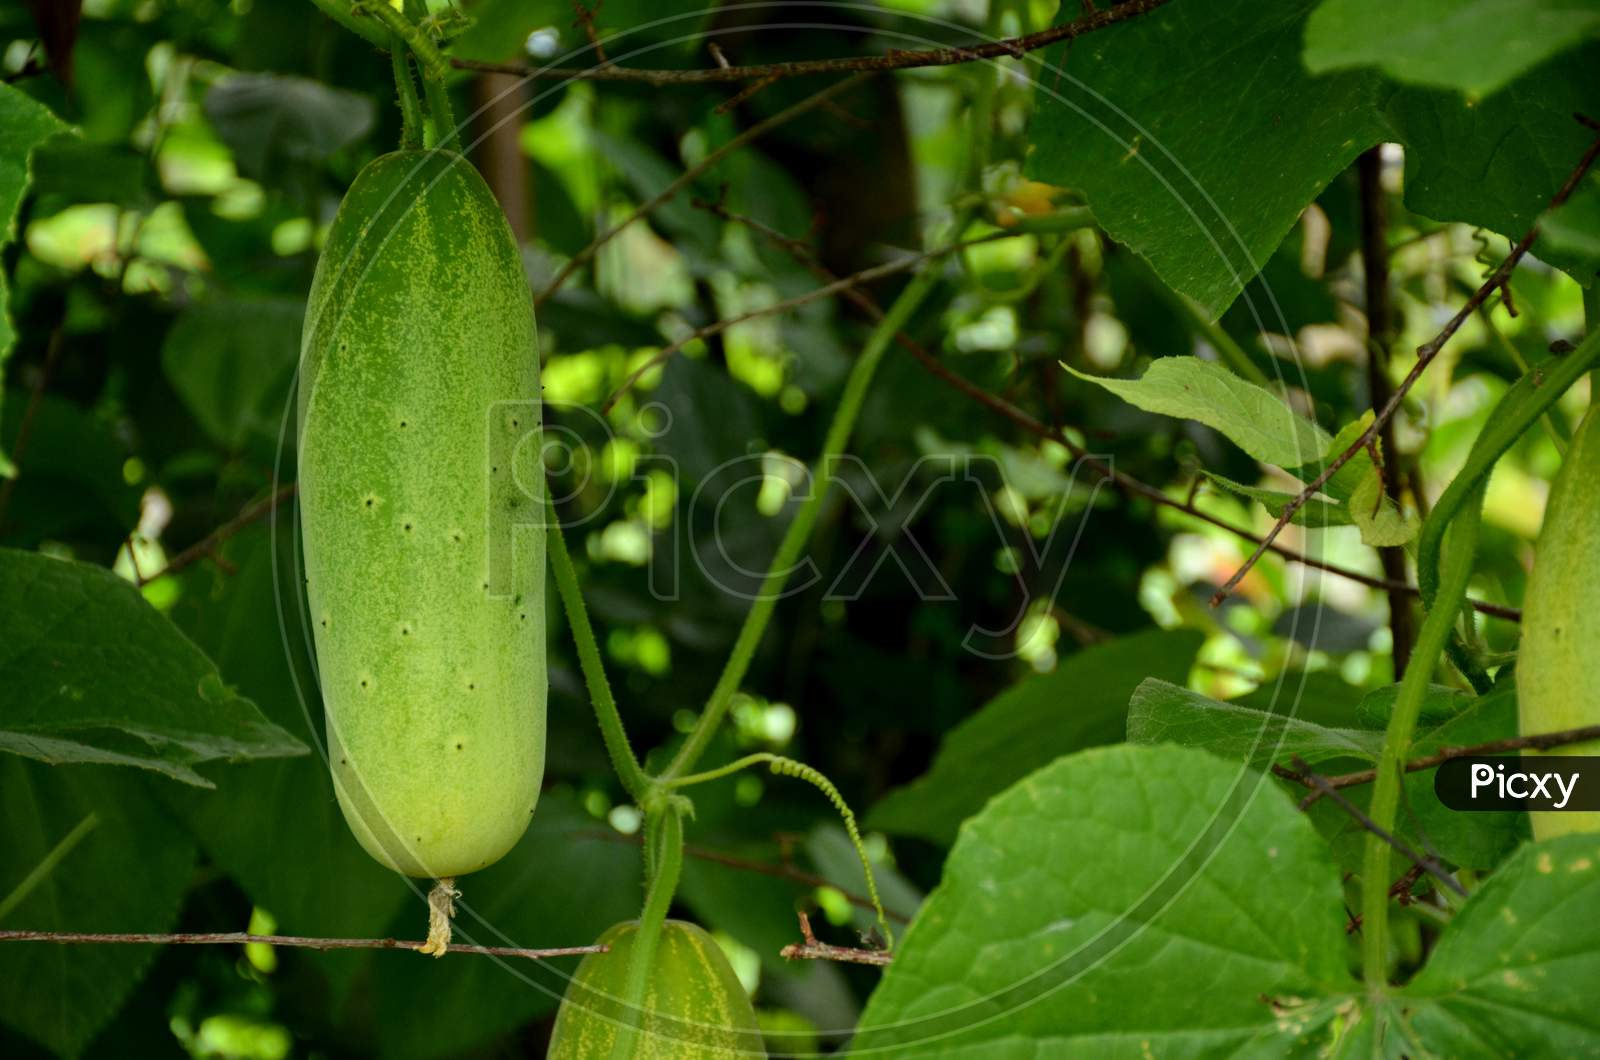 the ripe green cucumber with green leaves and vine.